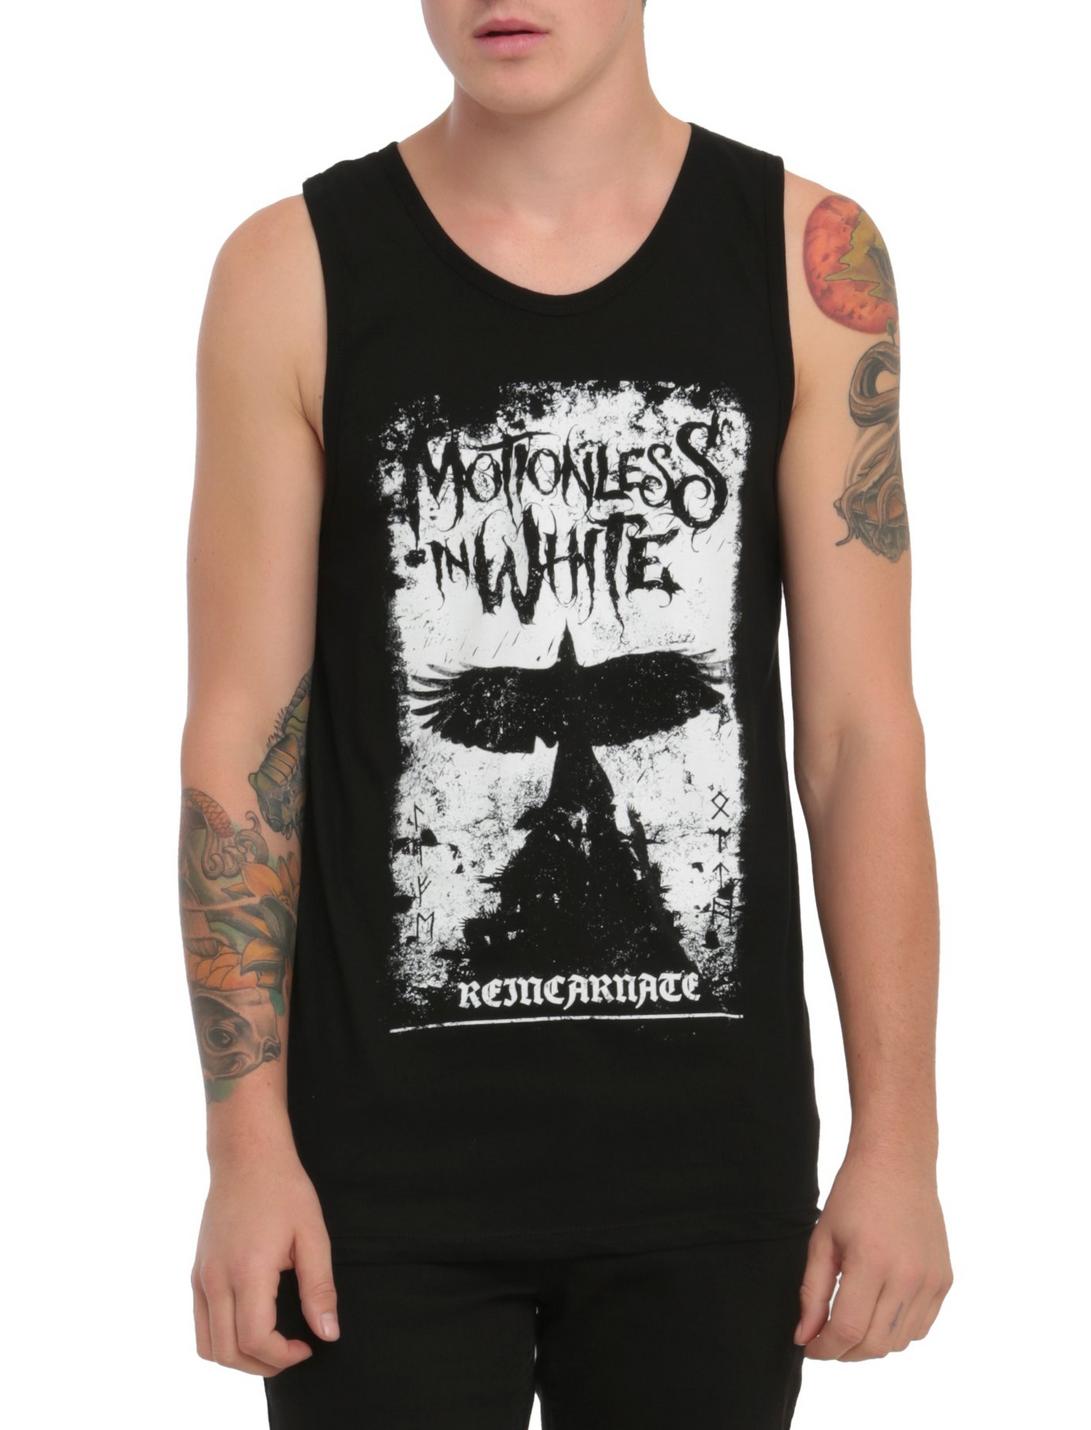 Motionless In White Crow Tank Top, BLACK, hi-res